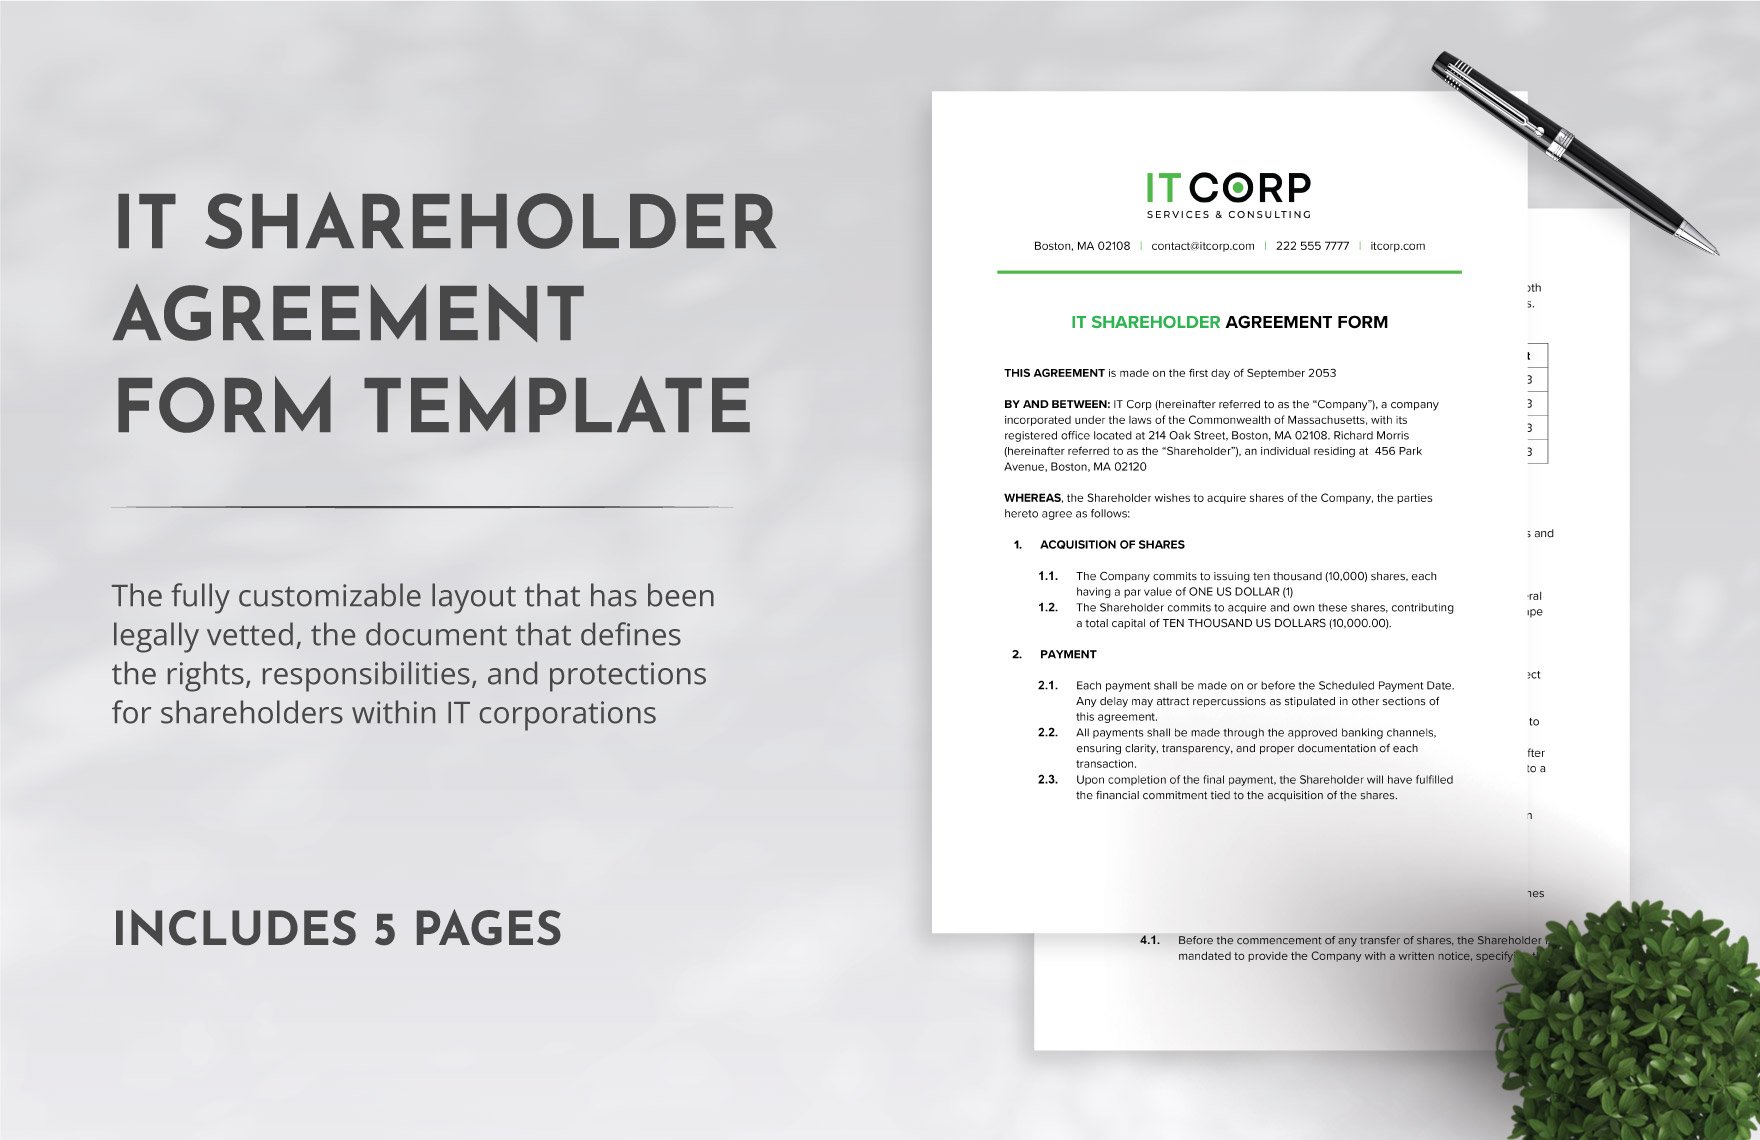 IT Shareholder Agreement Form Template in Word, Google Docs, PDF